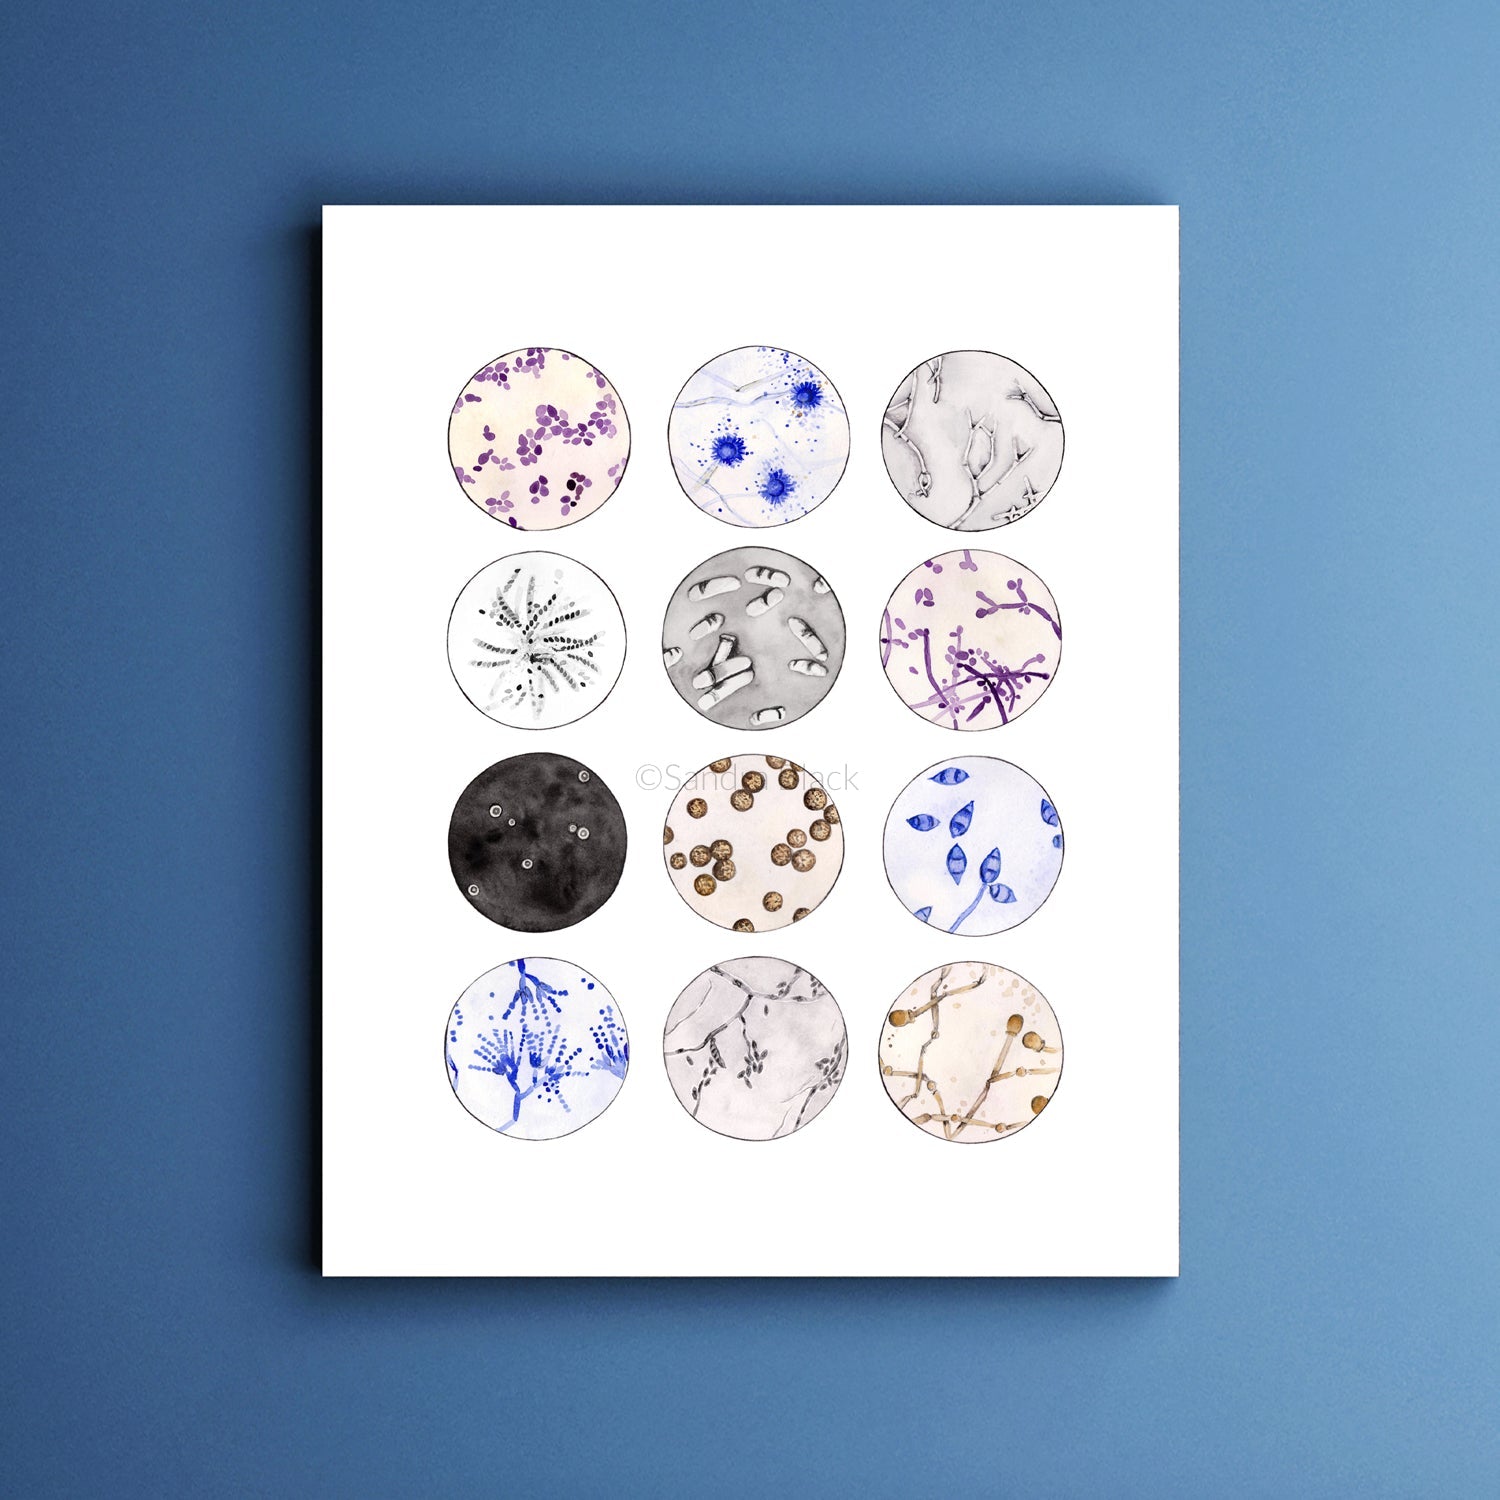 Fungi Collection art print with titles of microbes.